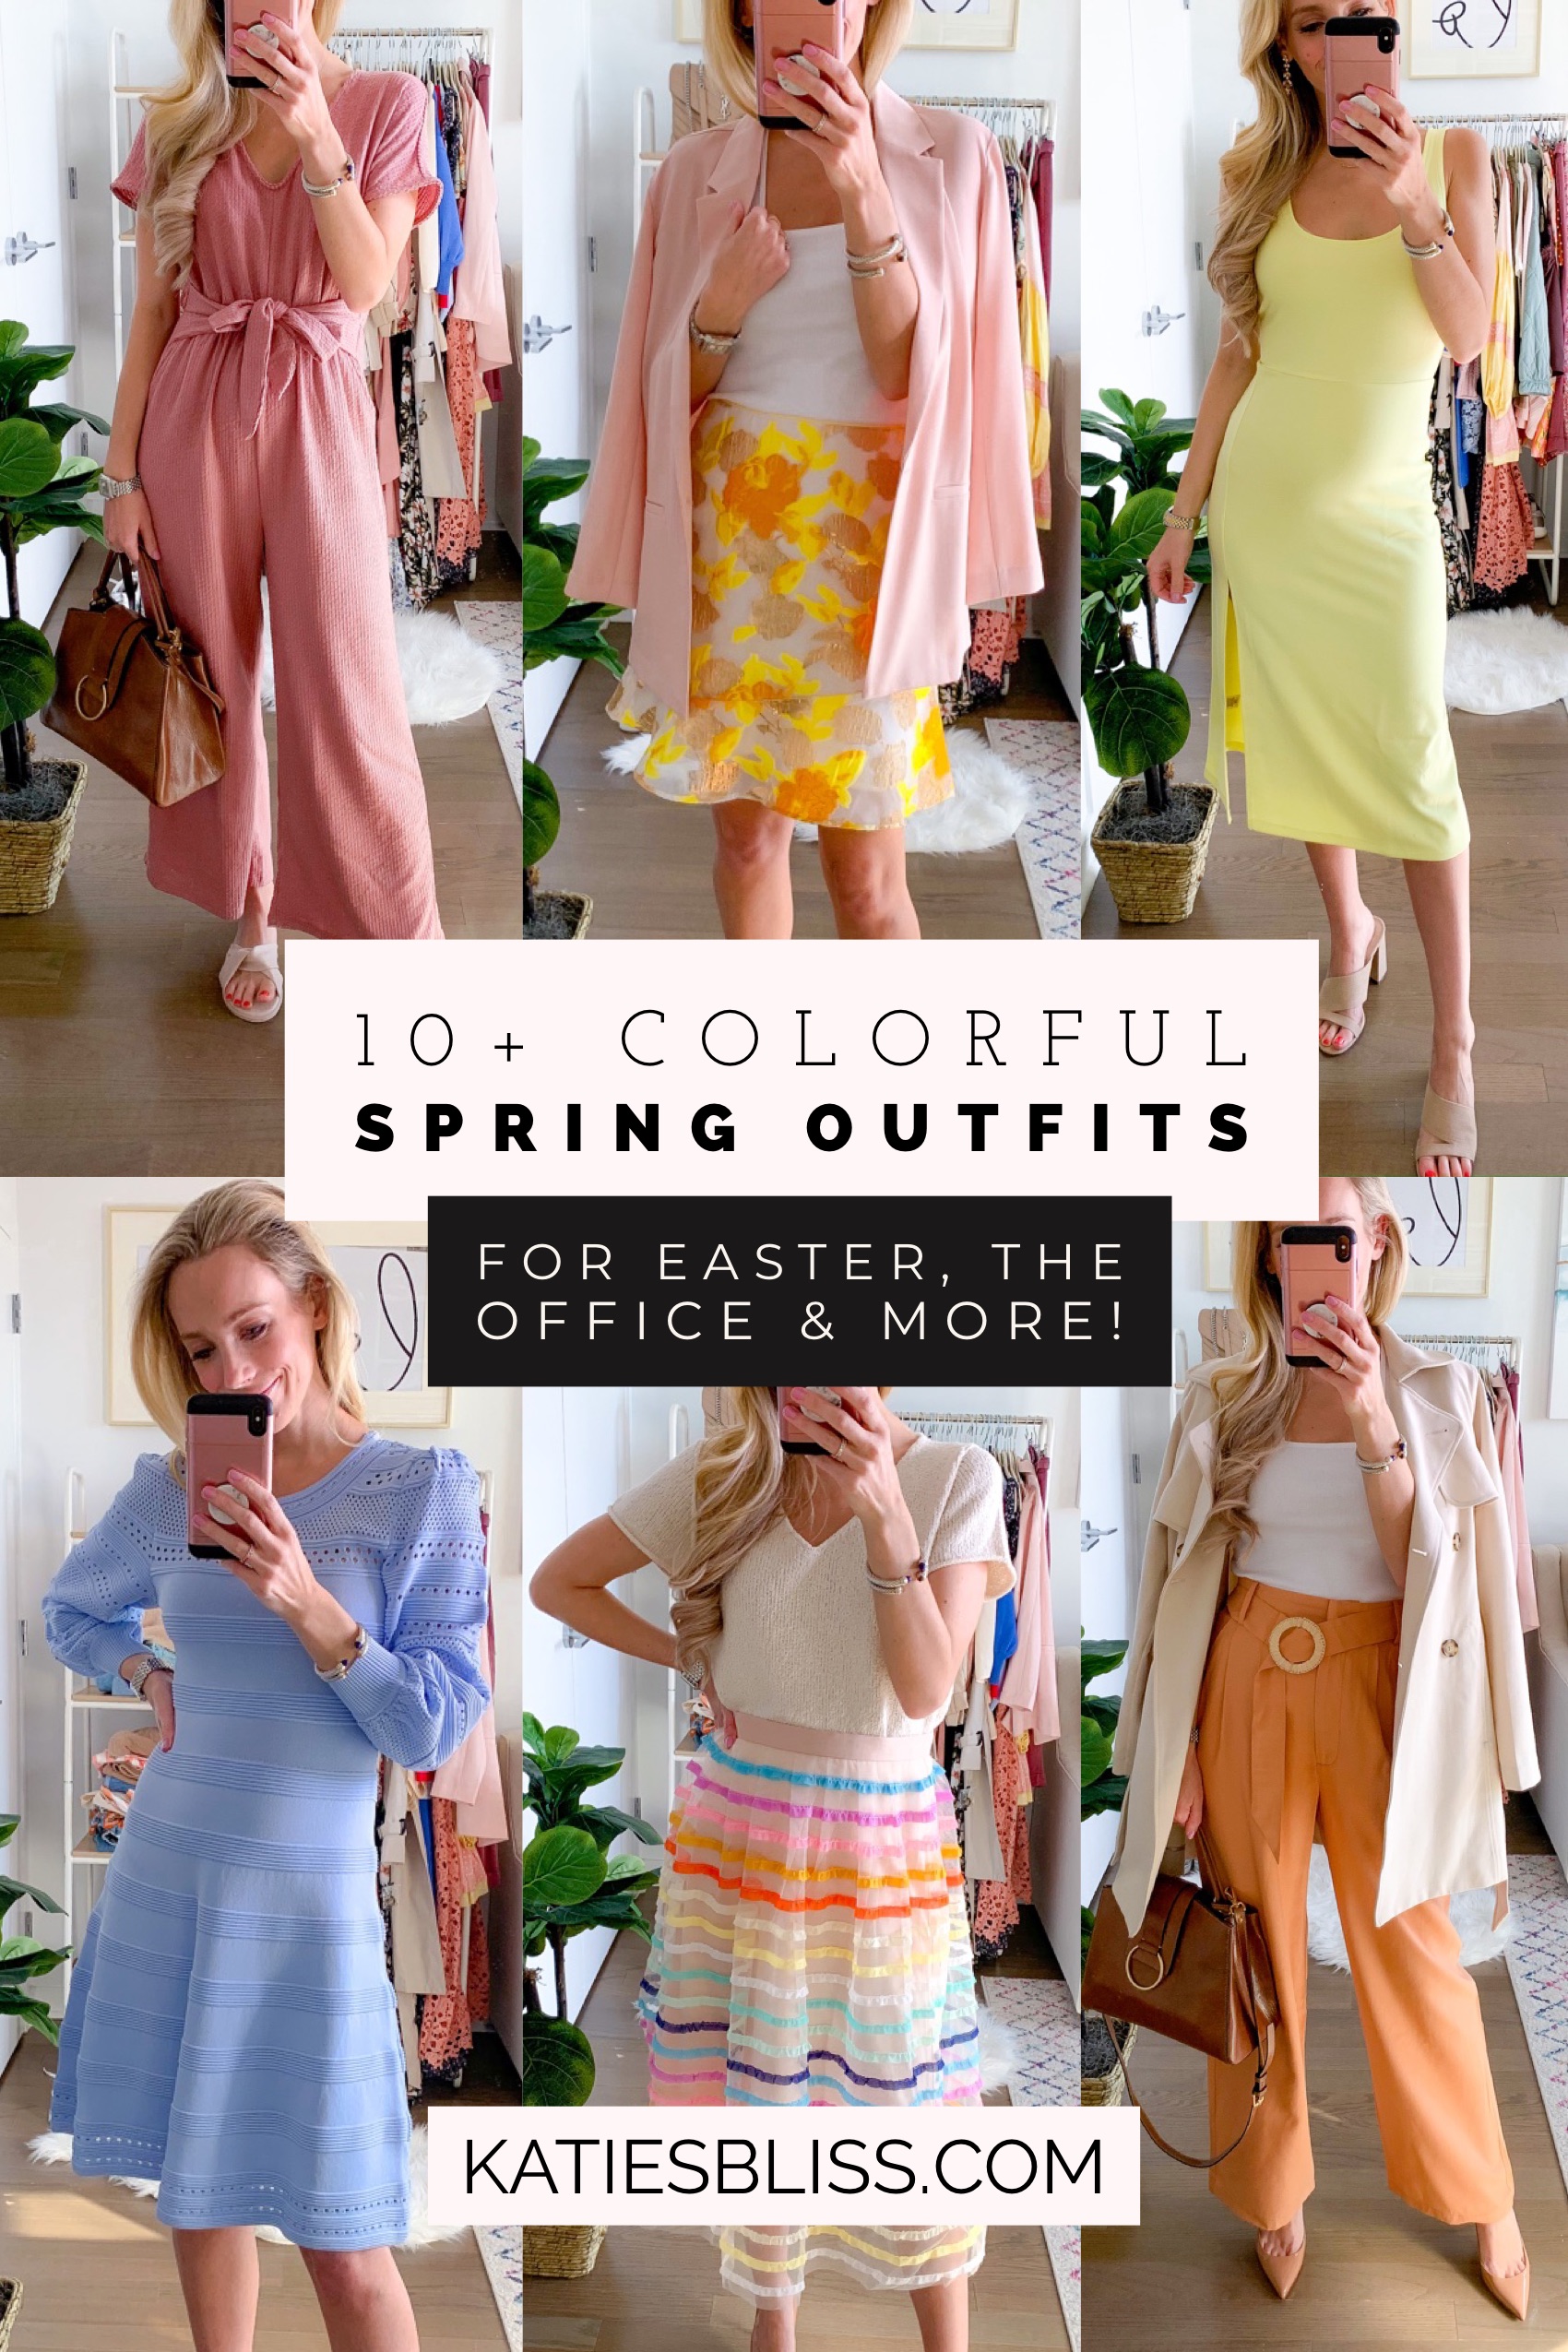 Colorful Spring Outfits